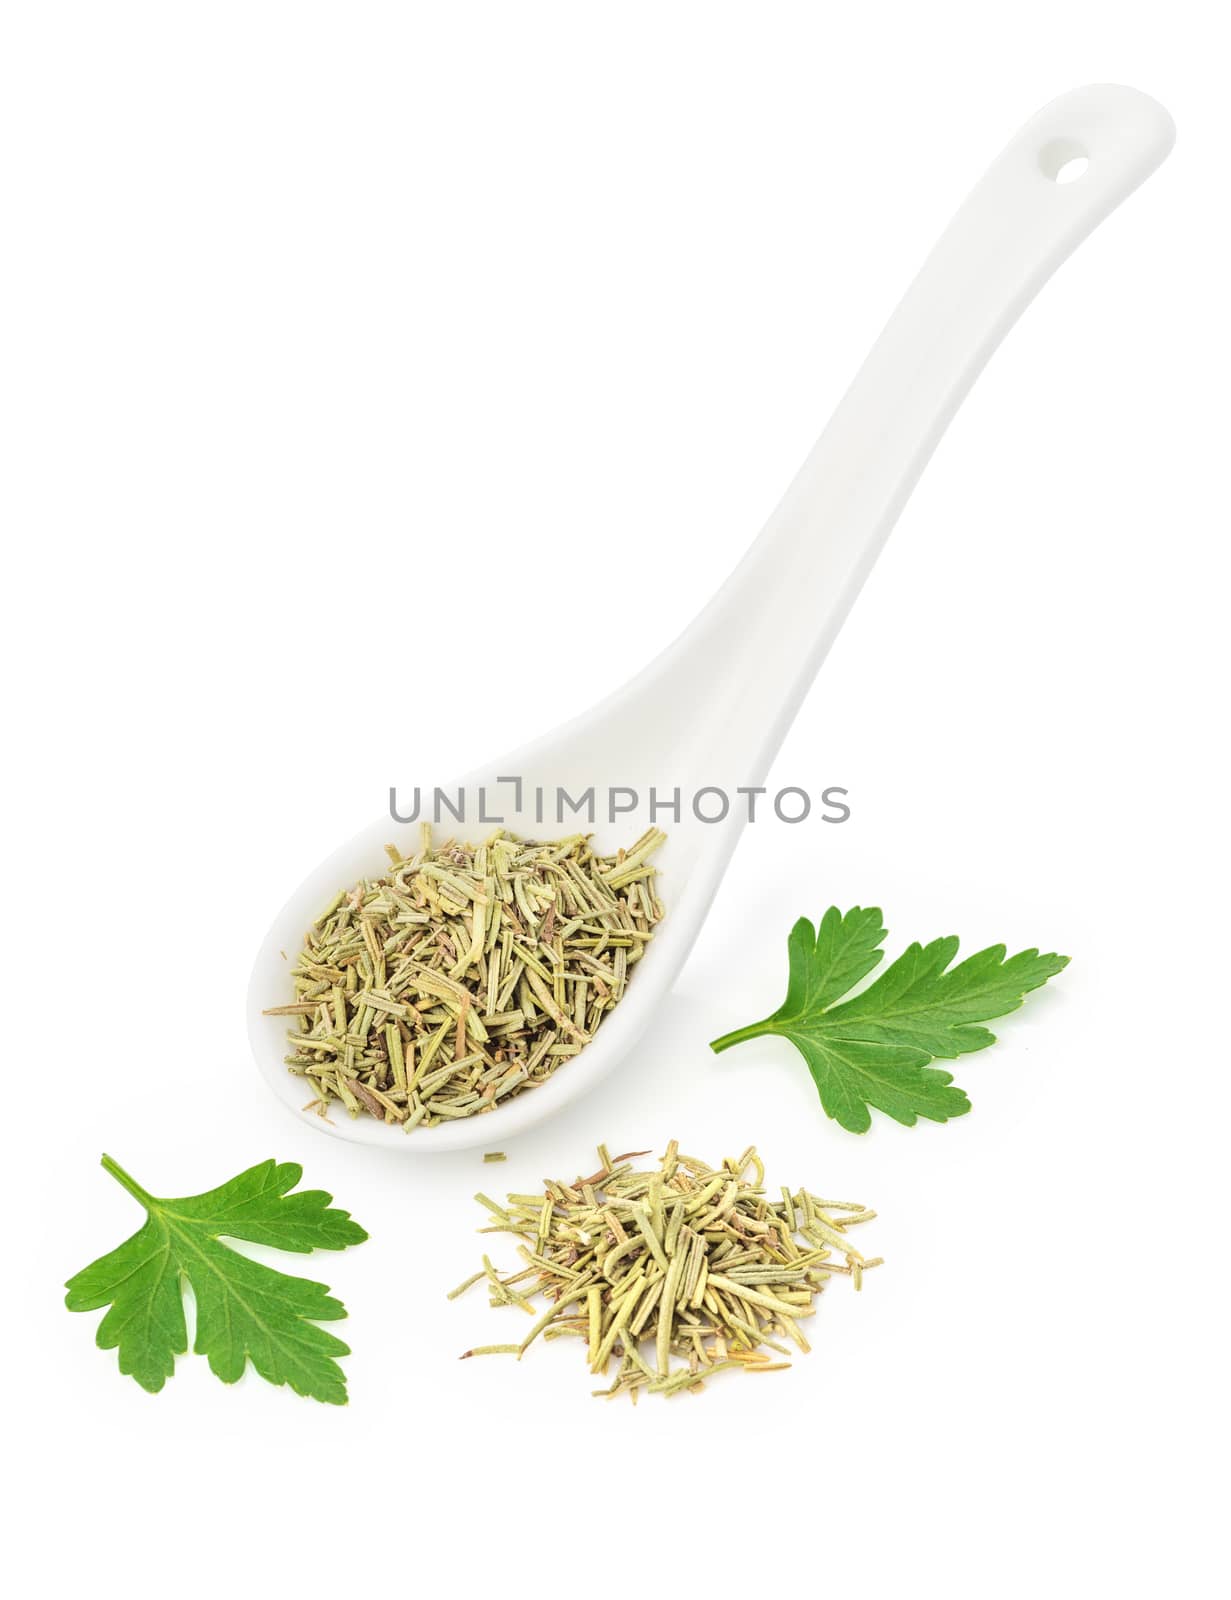 Dried rosemary in a white ceramic spoon isolated on a white background. Condiments, Spices, Herbs